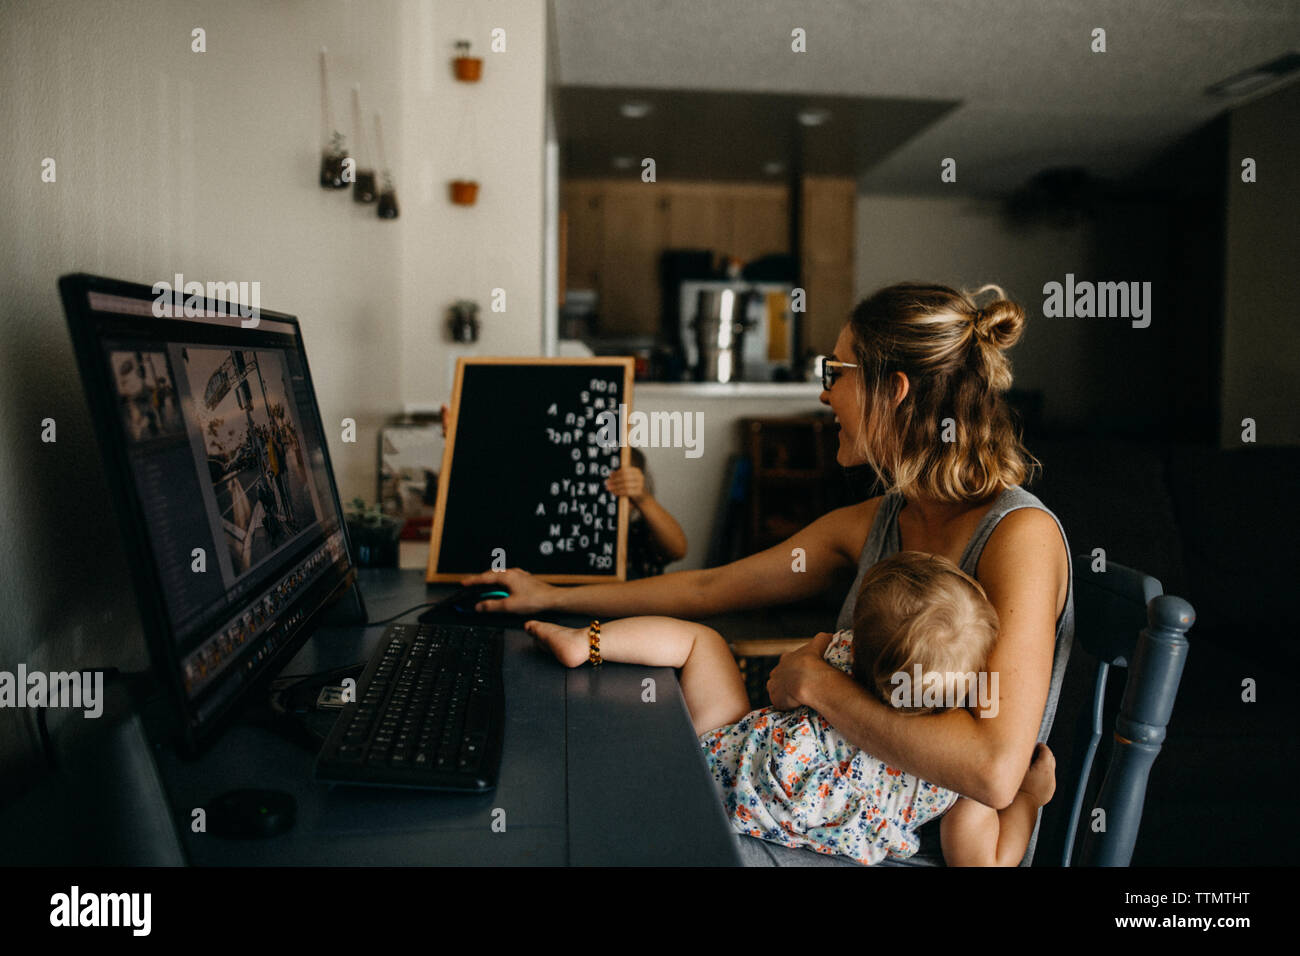 Working mother multitasking on the computer and holding baby Stock Photo